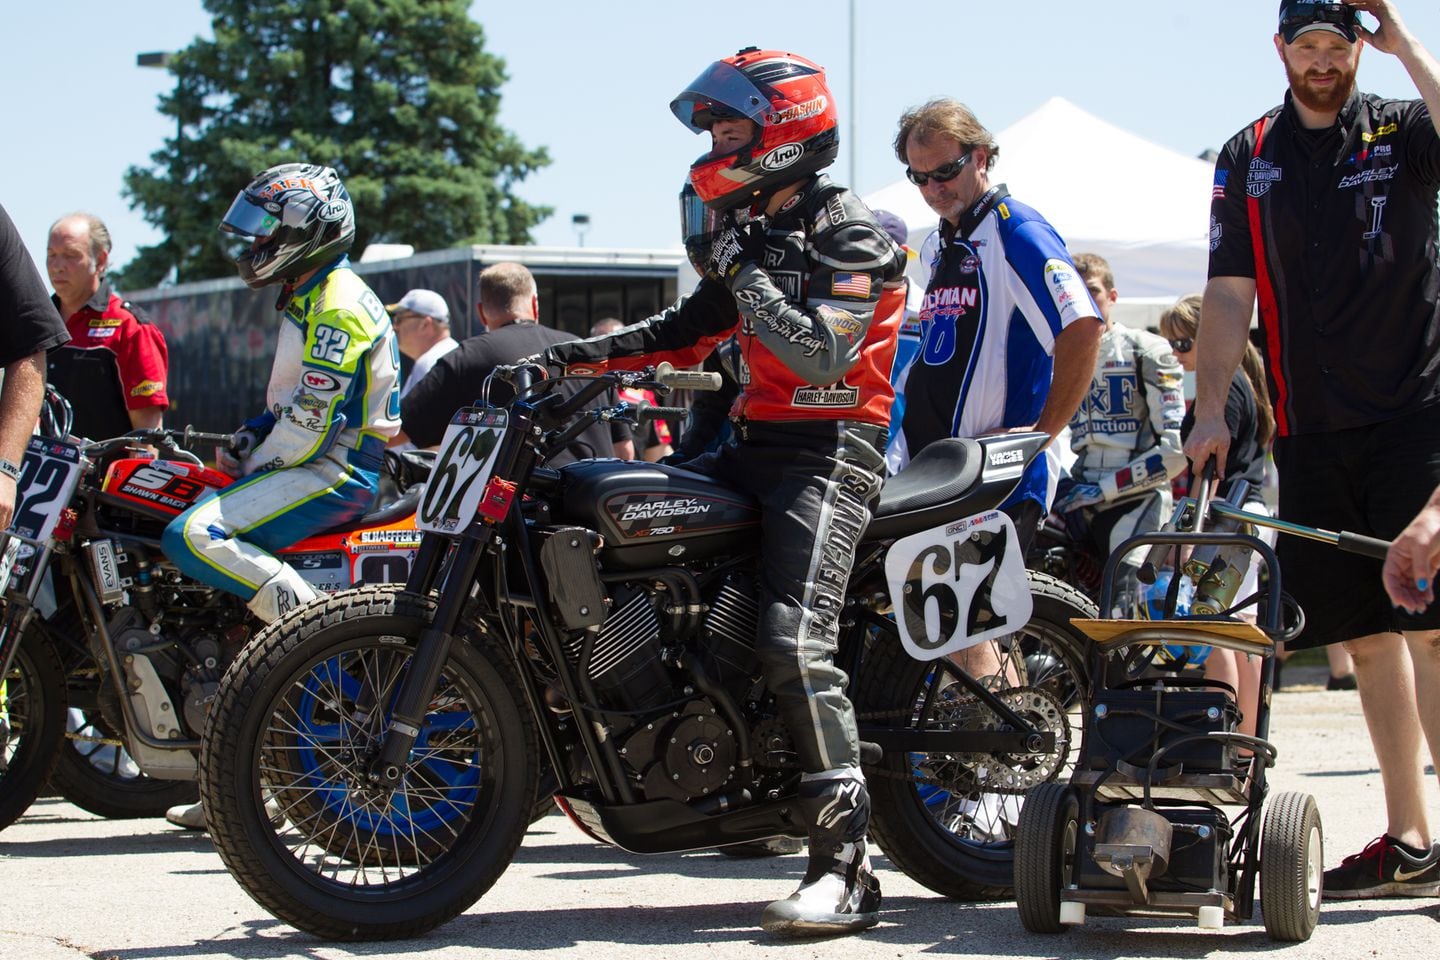 Harley Davidson S Xg750r Breaks Cover At The Springfield Mile Motorcyclist